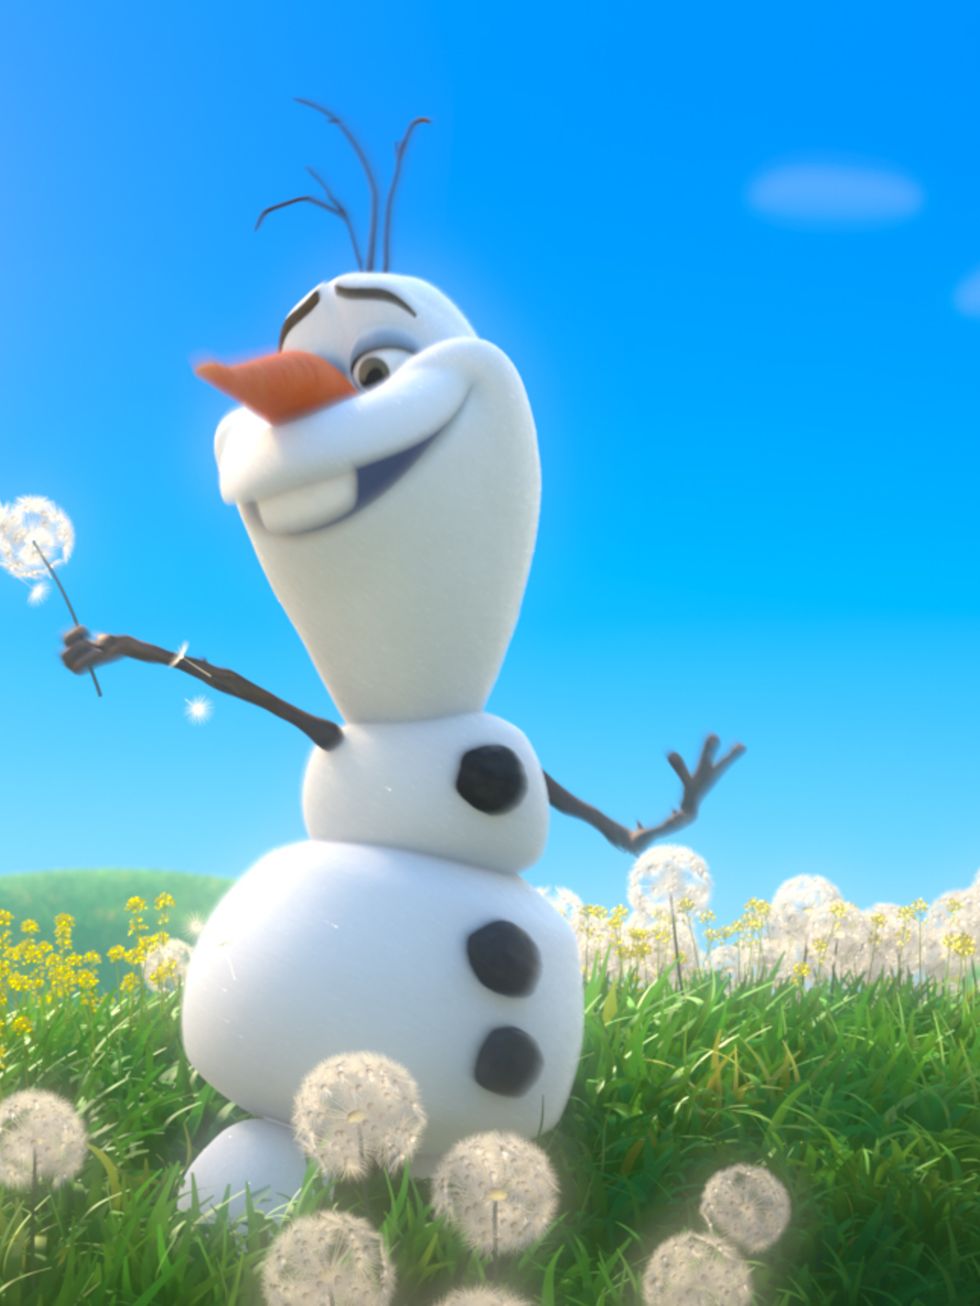 Grass, Daytime, Snowman, Happy, People in nature, Art, Grassland, Meadow, Animation, Spring, 